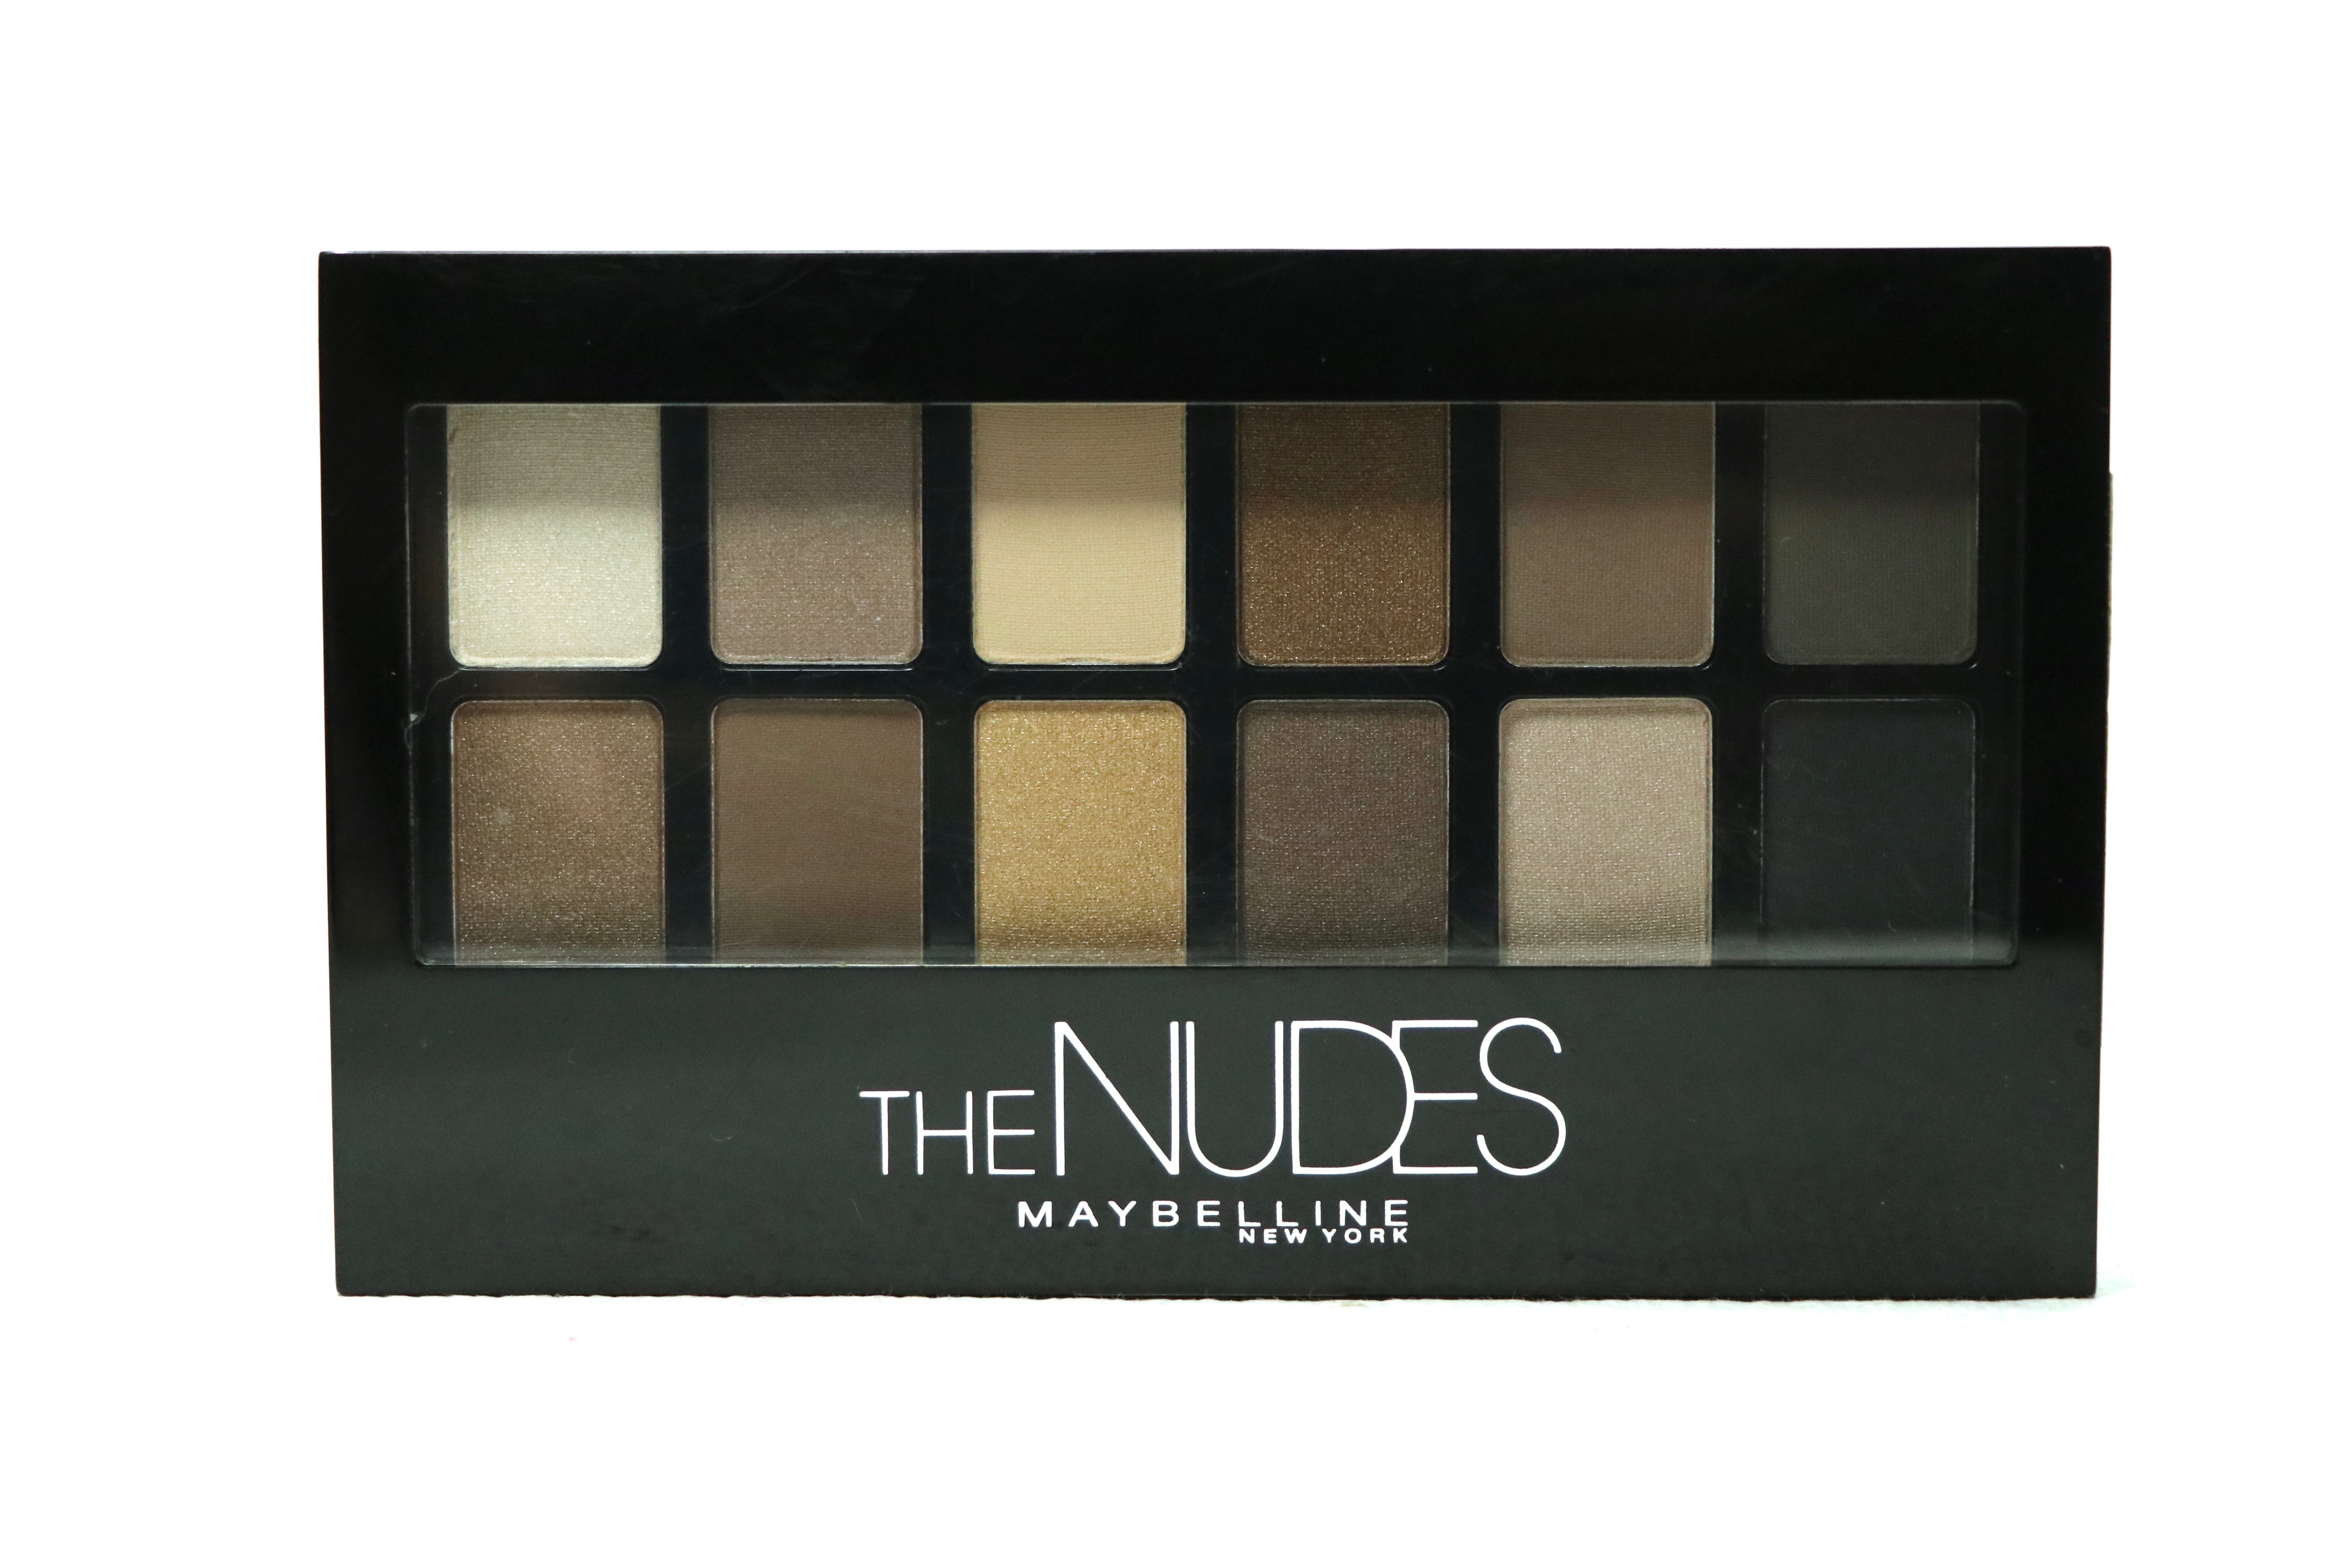 Maybelline The Nudes Eyeshadow Palette Review Swatches Front Makeup And Beauty Forever